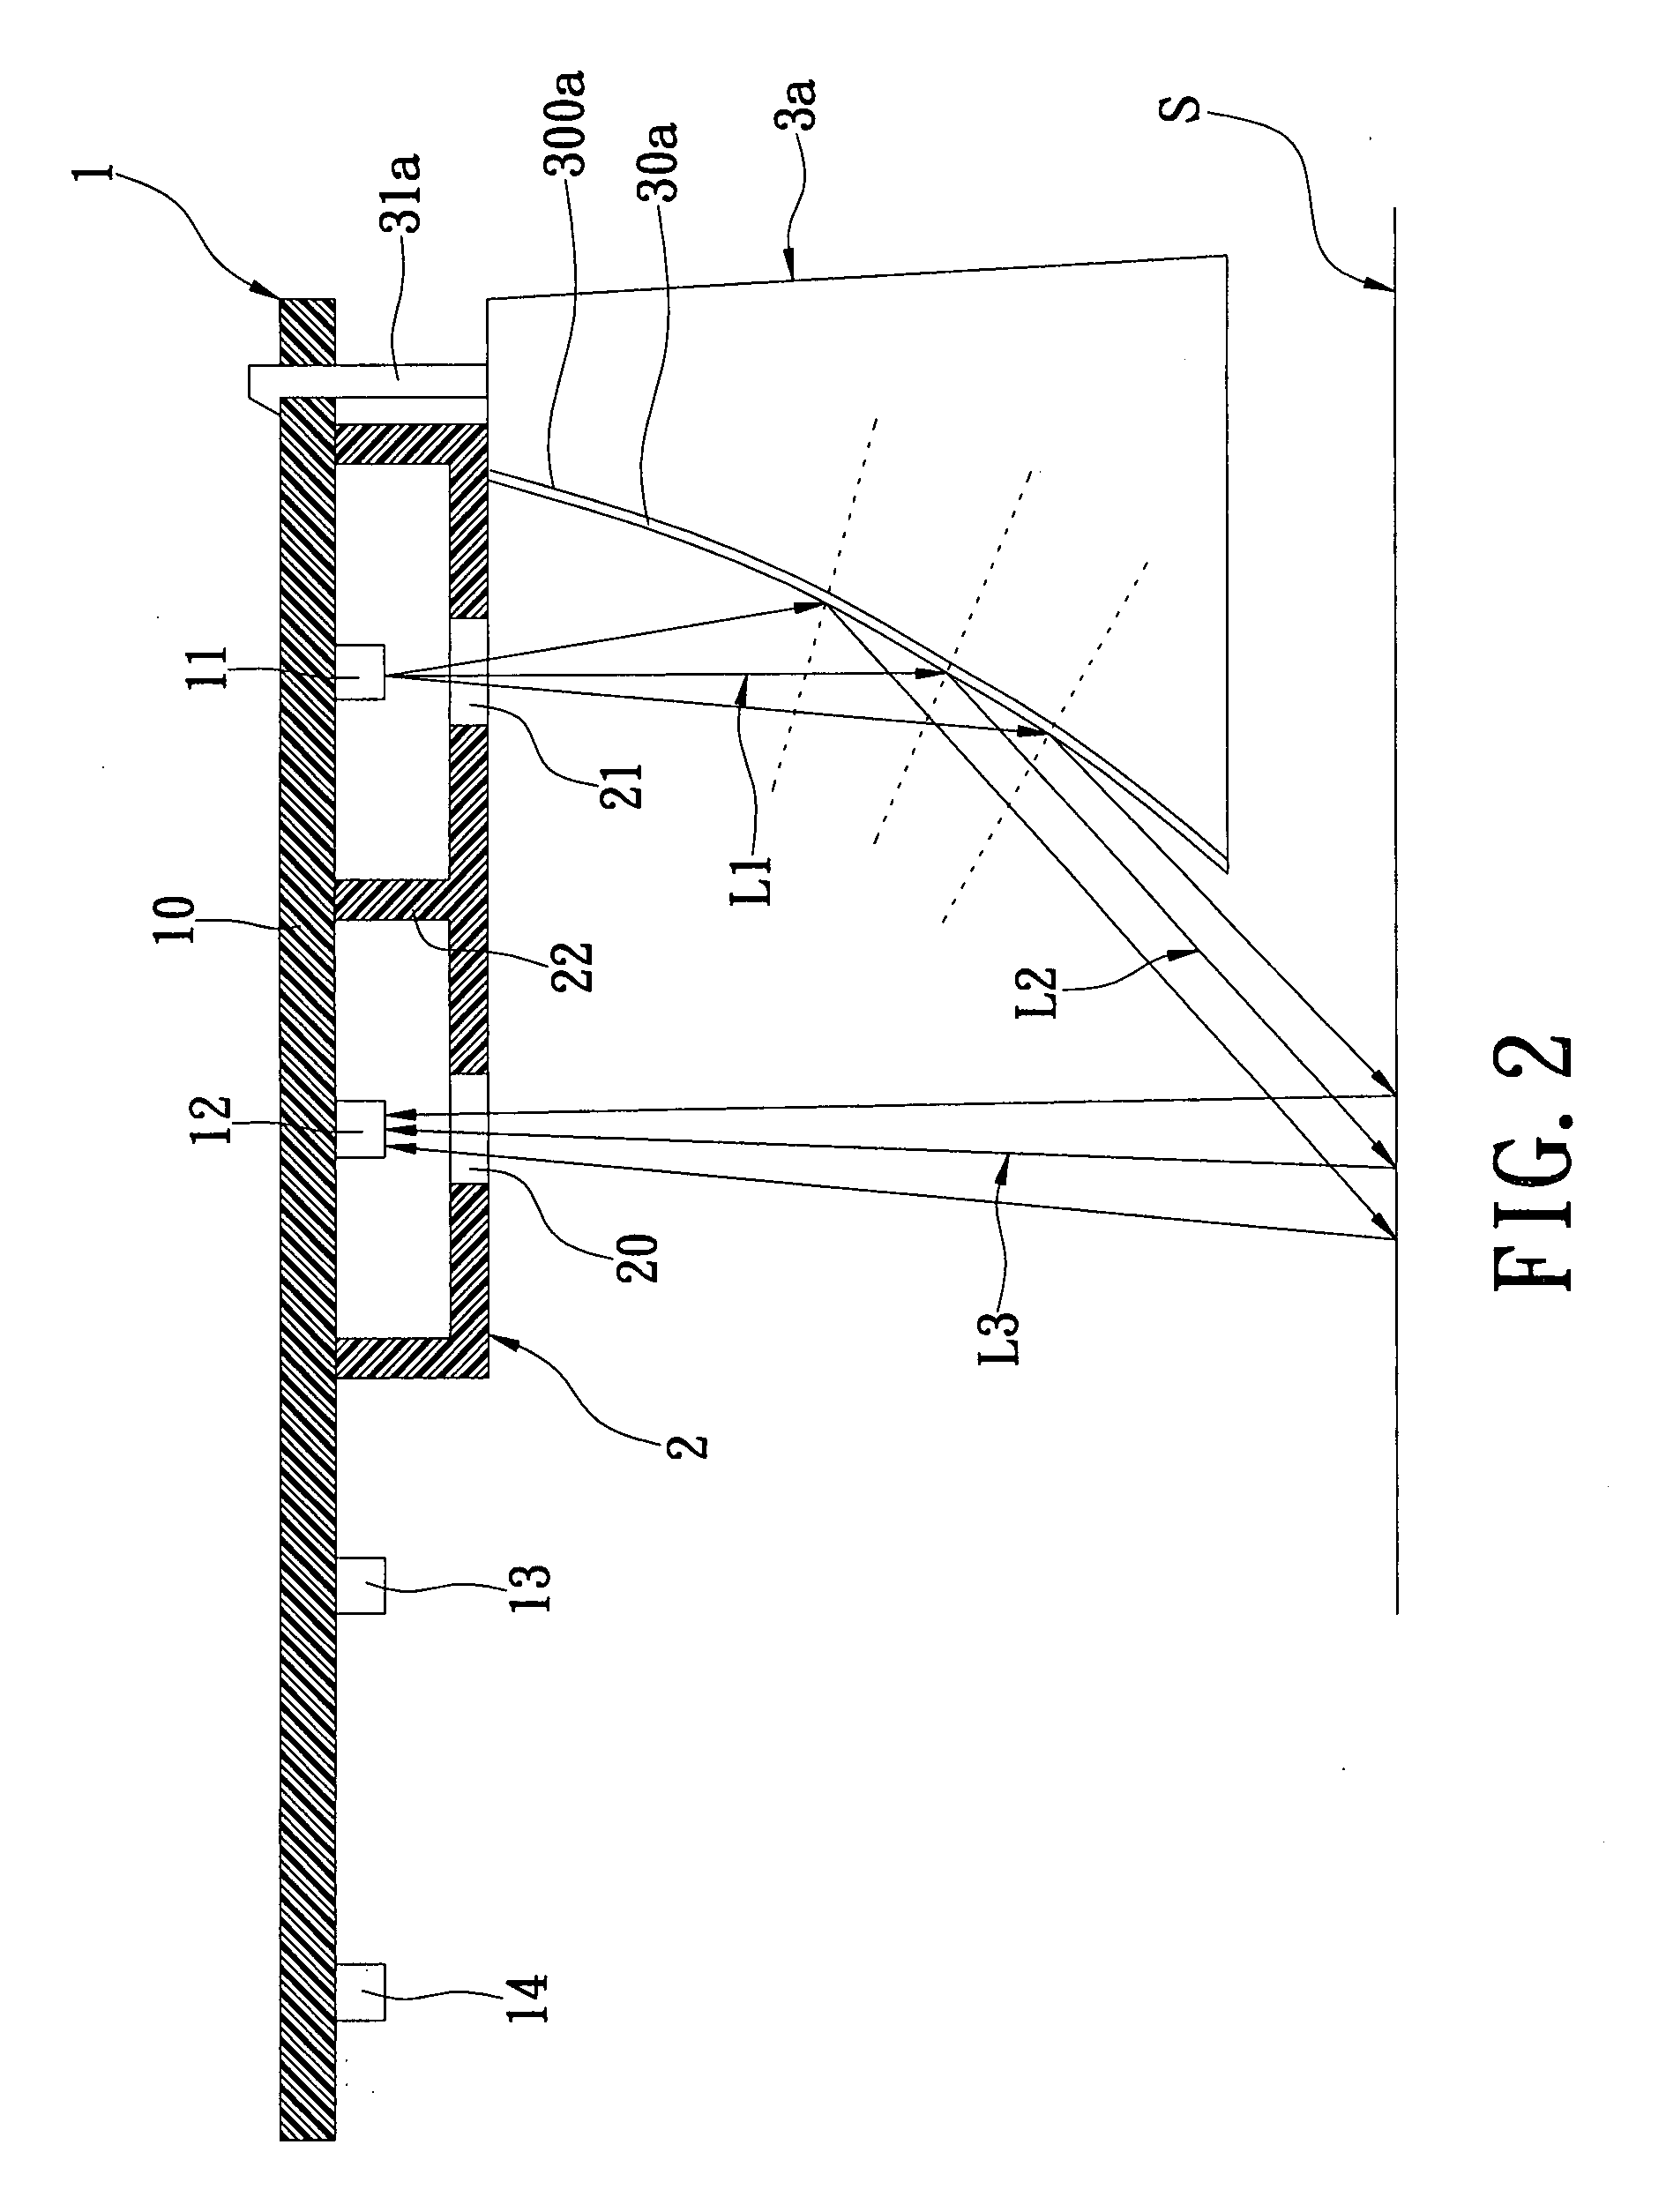 Motion-detecting module with a built-in light source